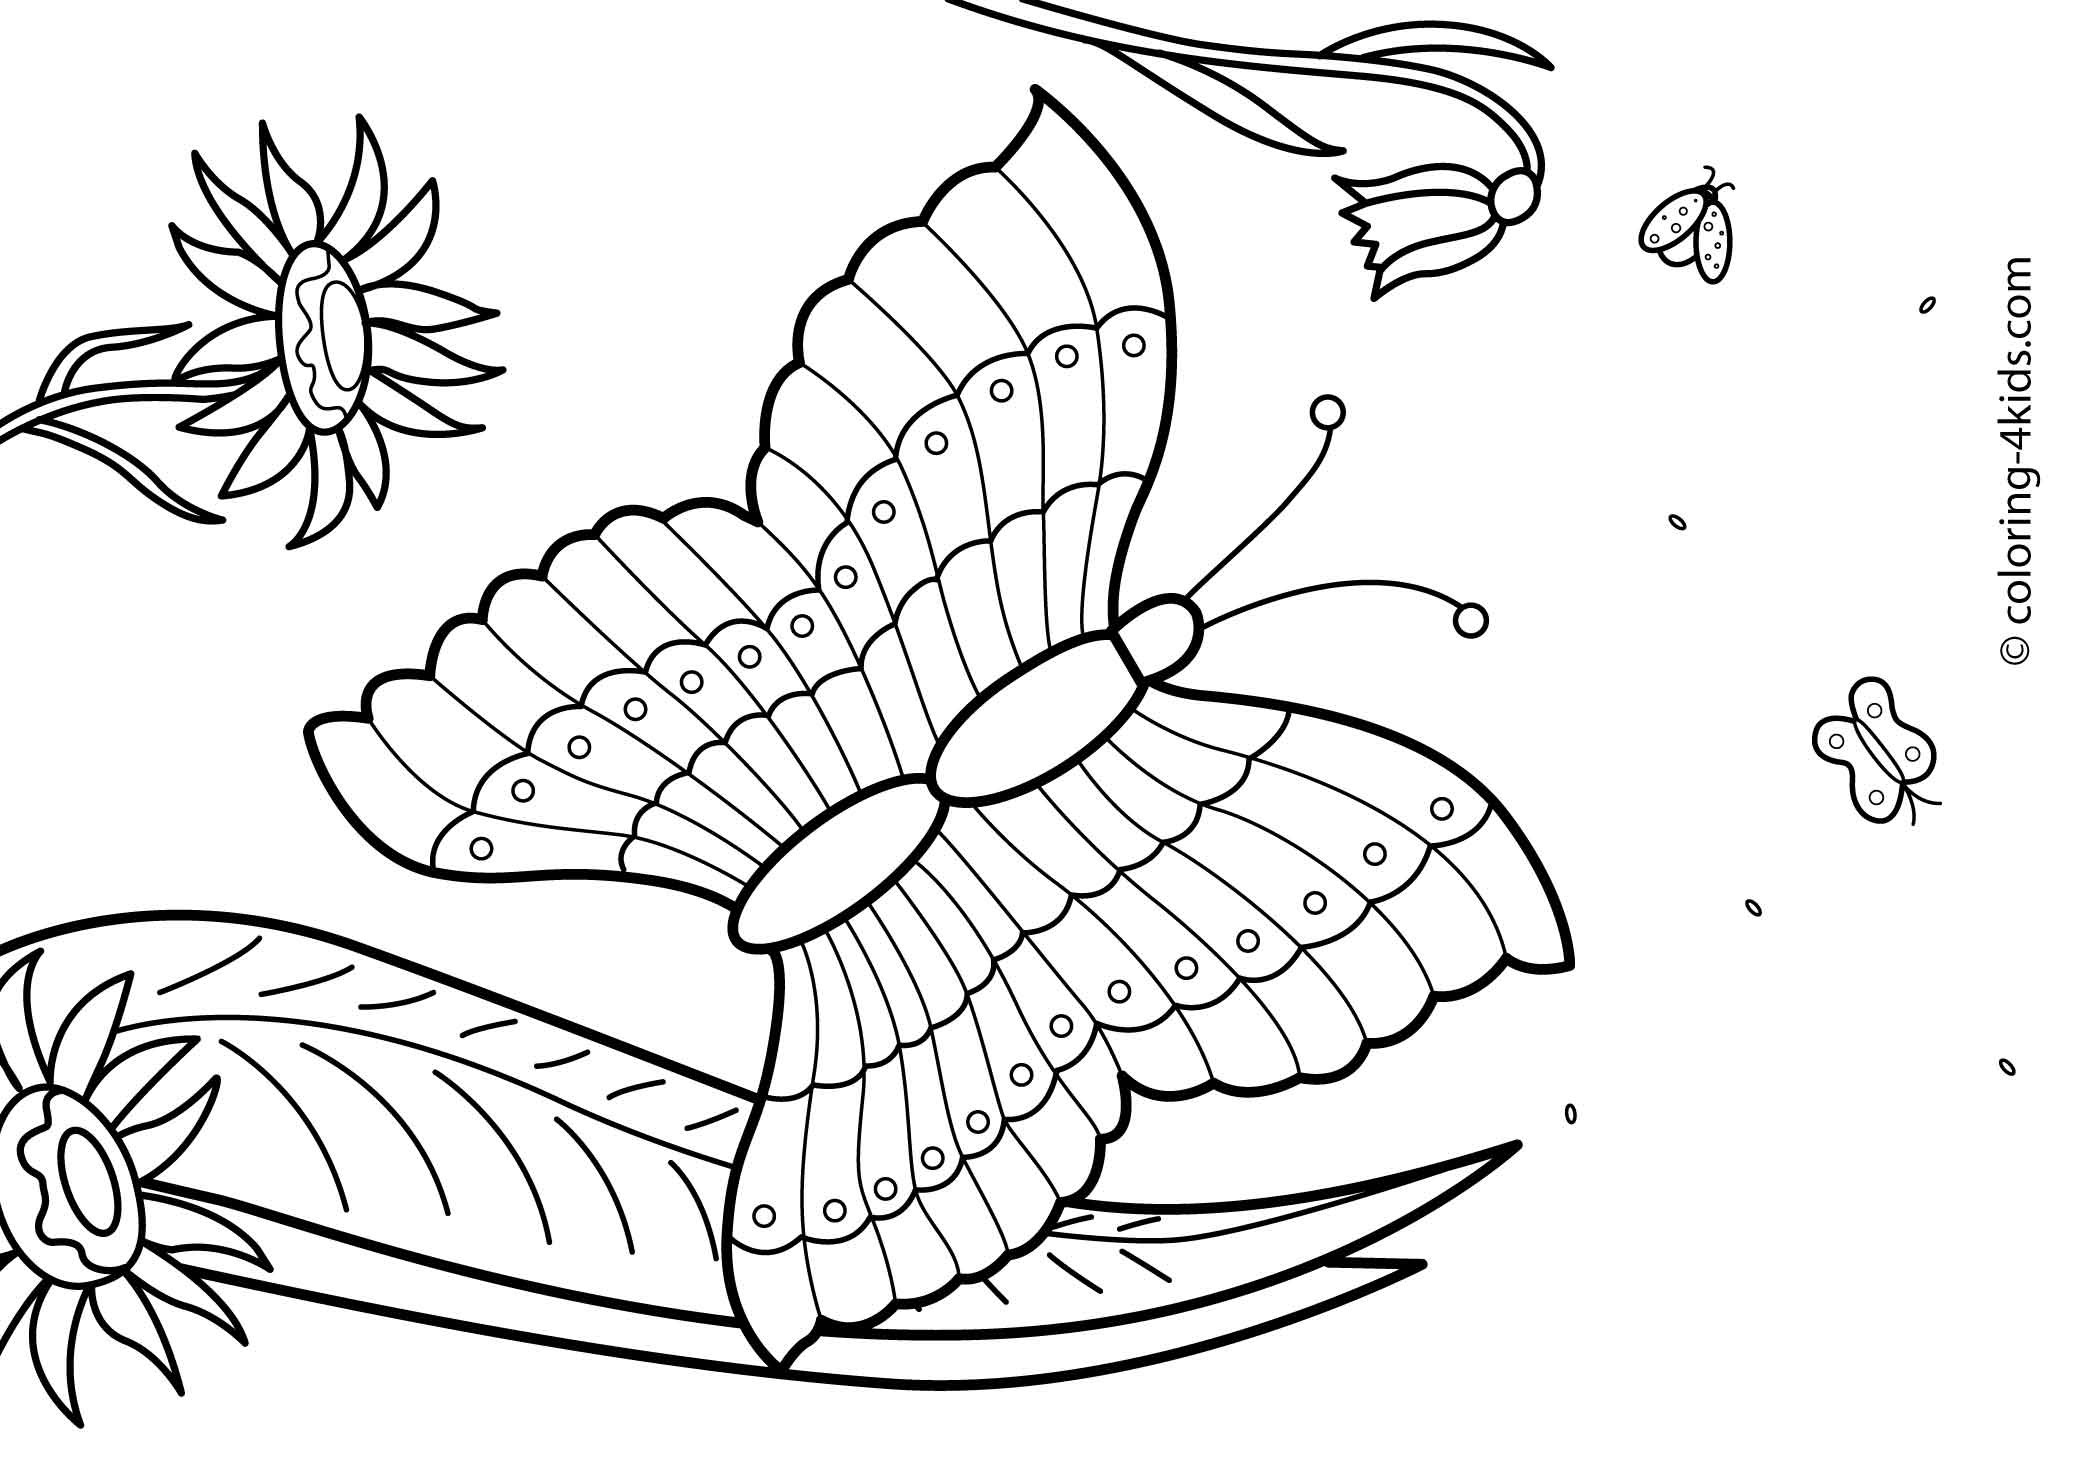 Coloring Pages For Kids Summer
 27 Summer season coloring pages part 2